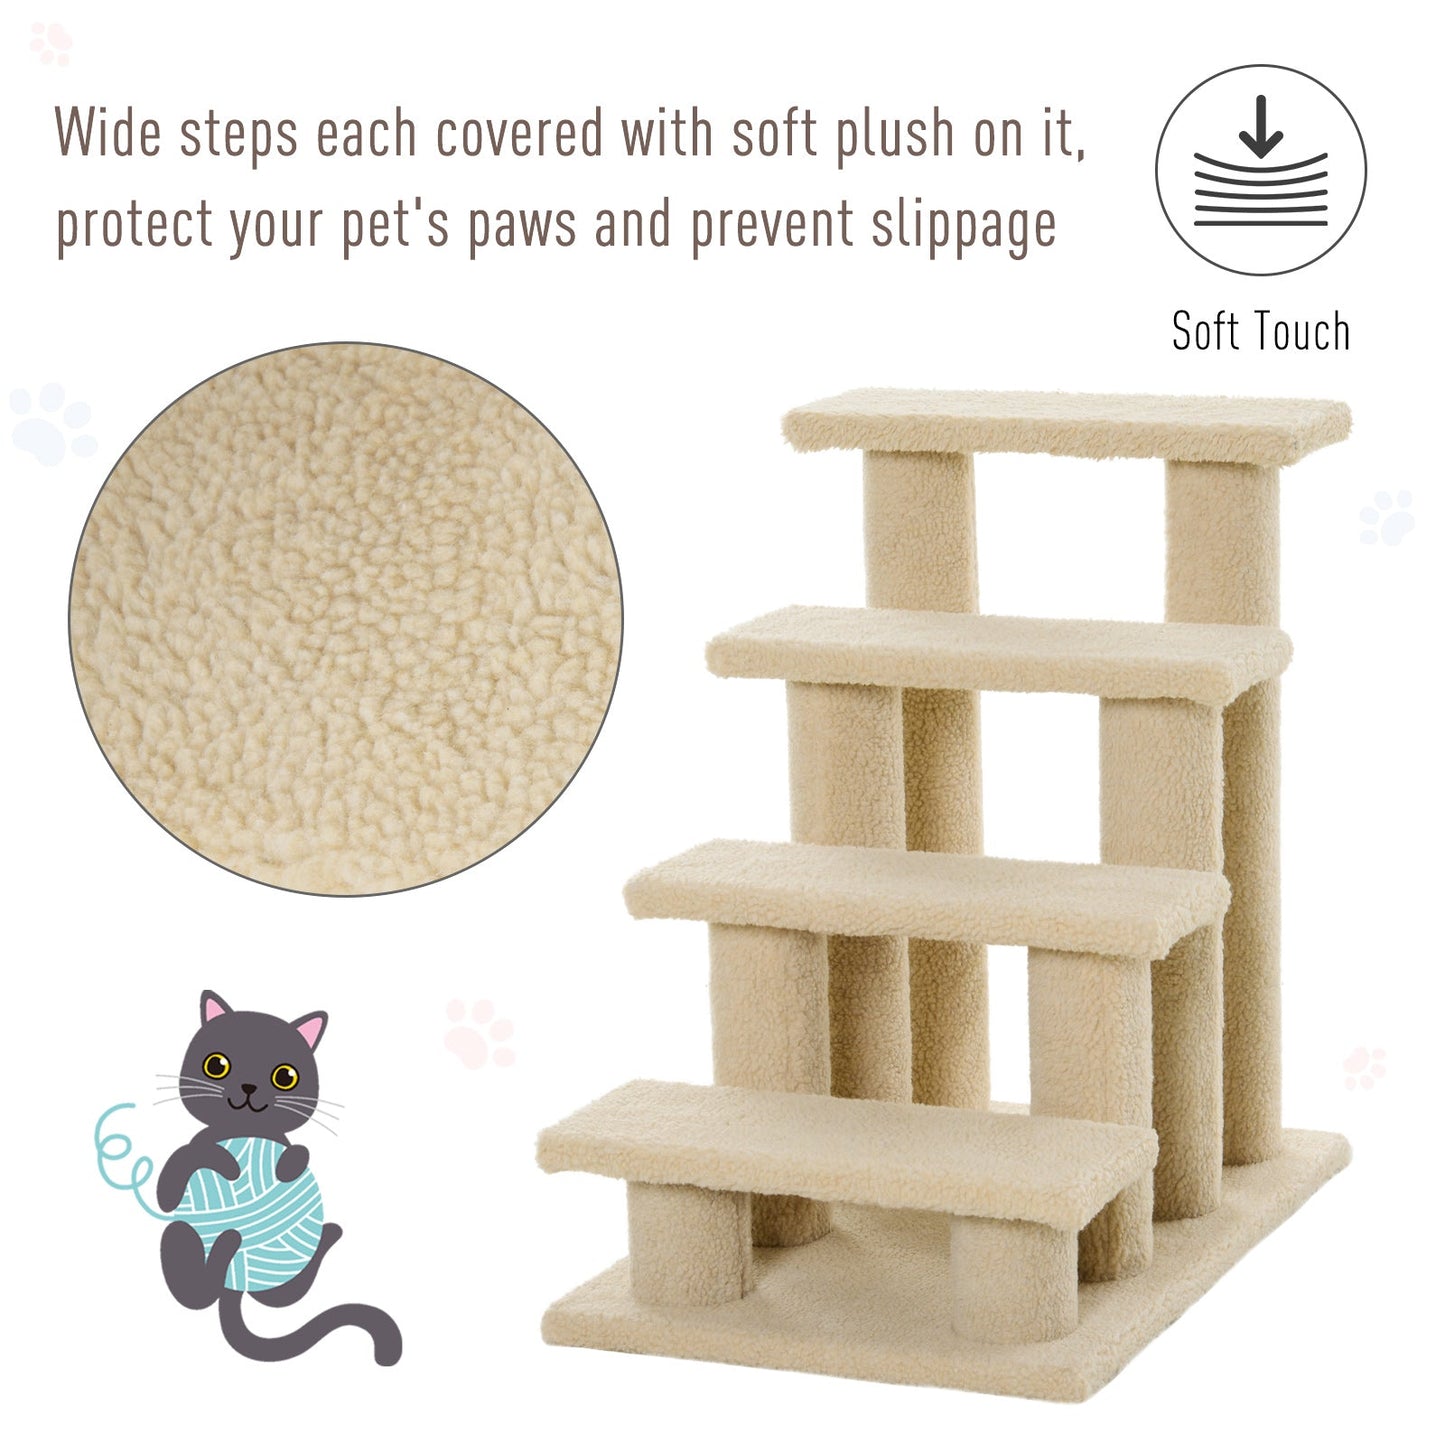 -PawHut 25" 4-Step Pet Stairs, Multi-Level Durable Wear-Resistant Particle Board Carpeted Ladder Ramp, Cat Dog Scratching Post, Cat Tree Climber, Beige - Outdoor Style Company